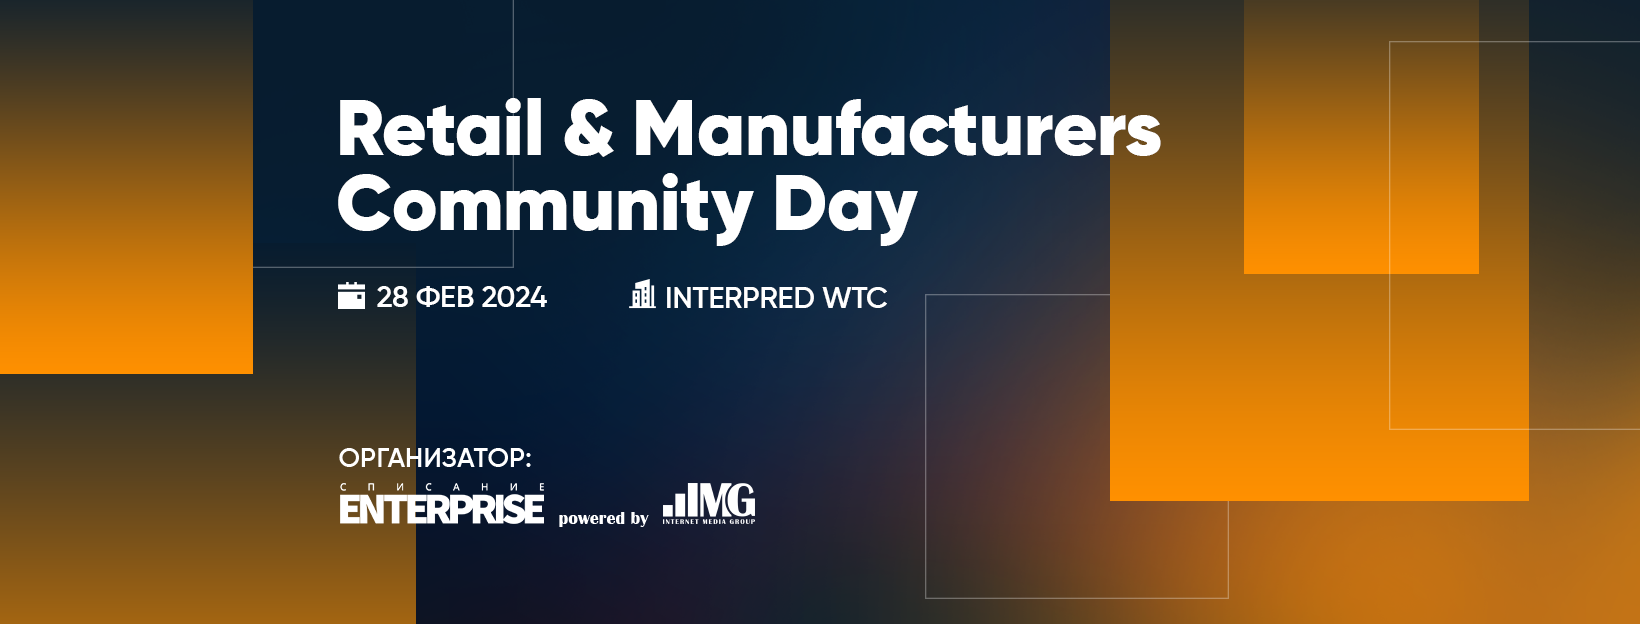 Retail & Manufacturers Community Day: trends and innovations